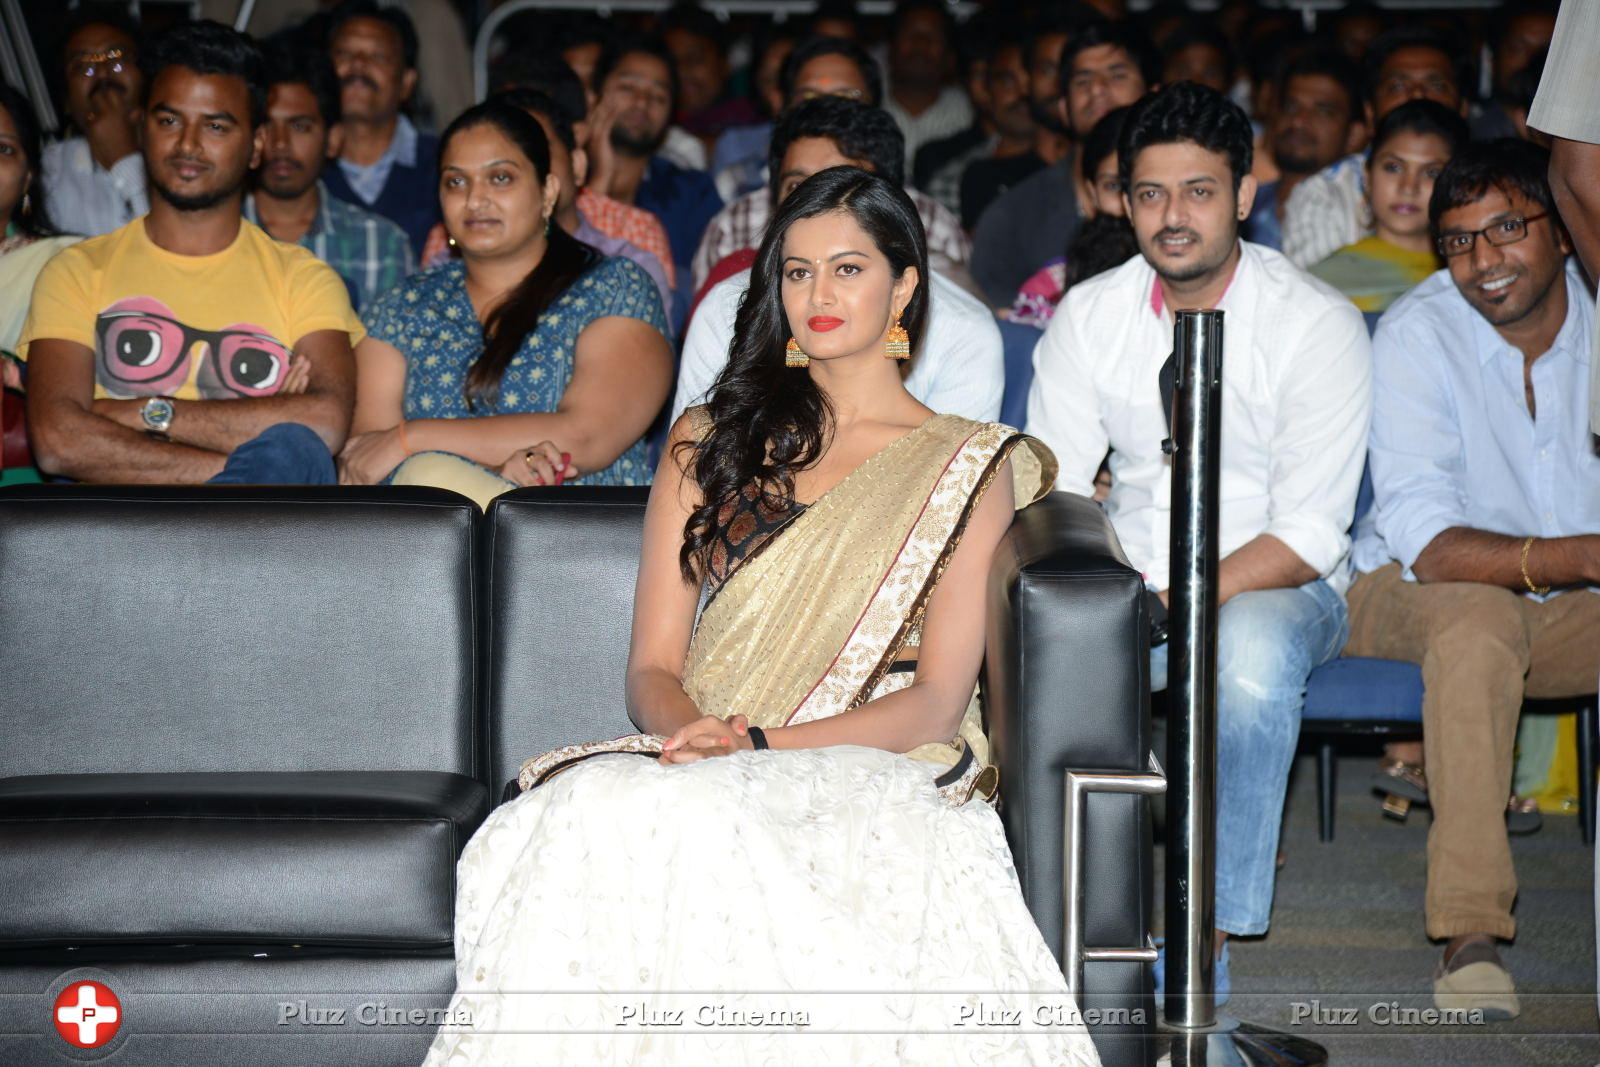 Shubra Aiyappa - Prathinidhi Movie Audio Release Function Photos | Picture 638062